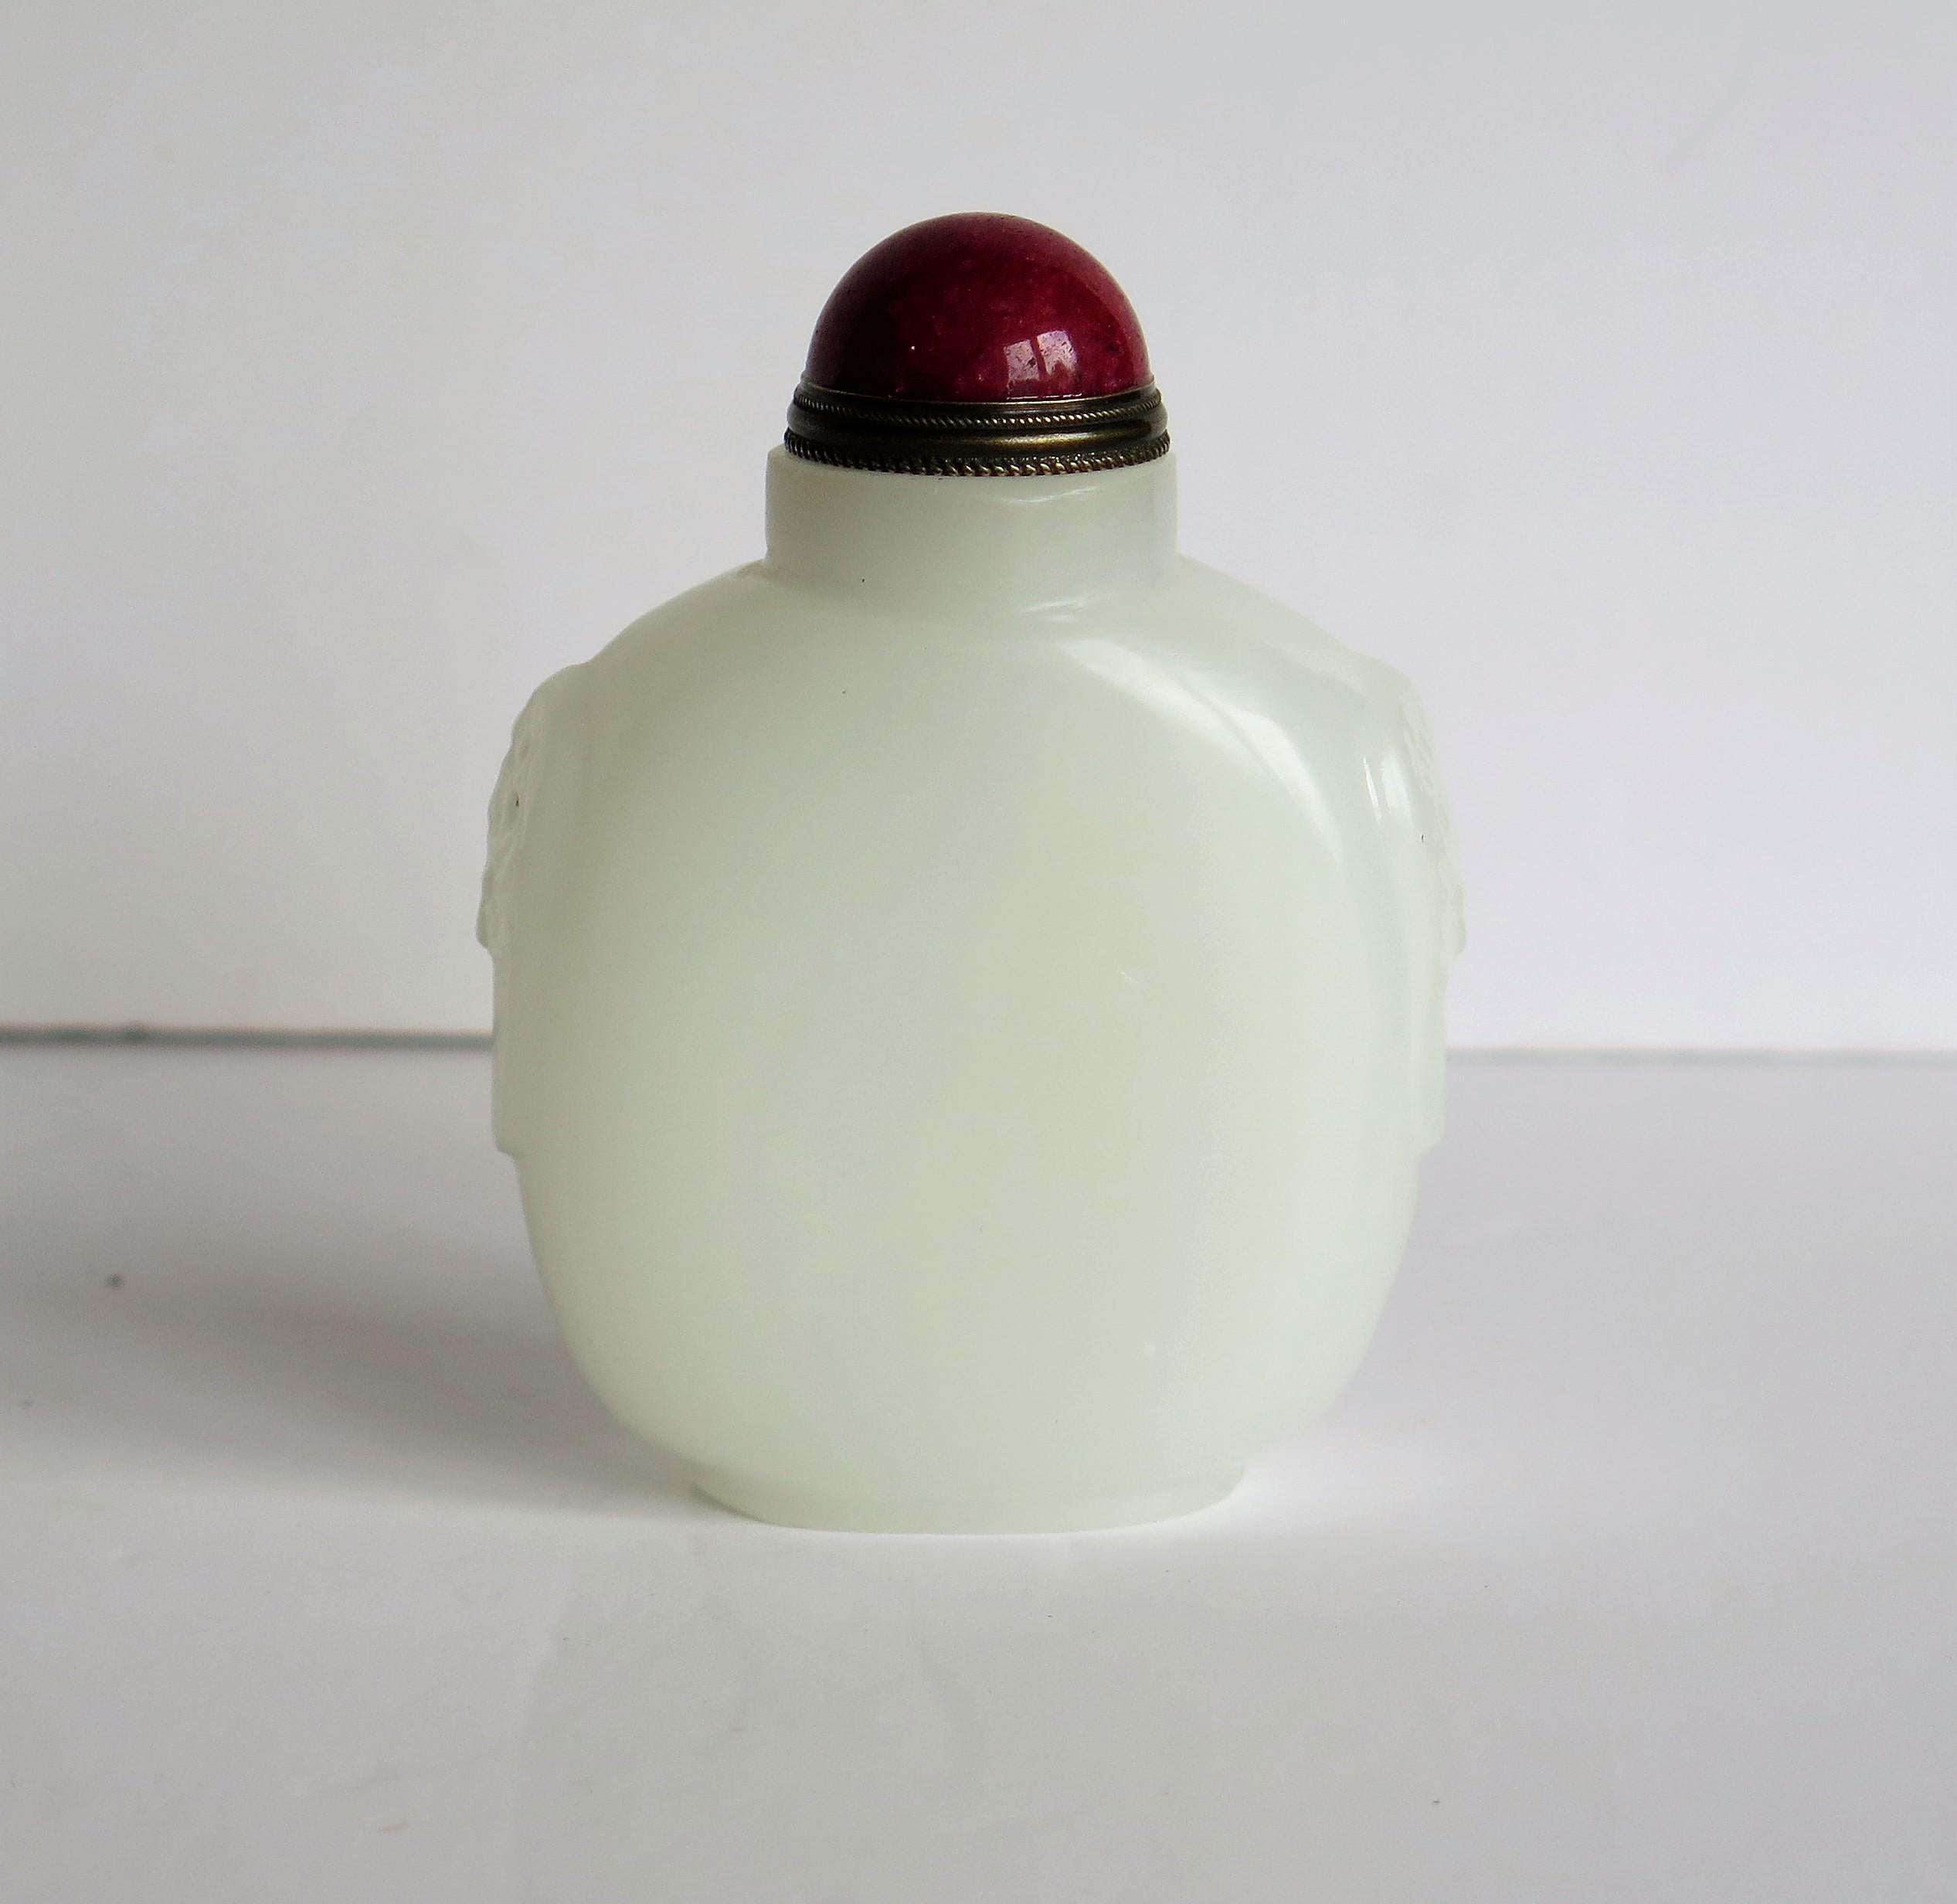 This is a beautiful Chinese, White Jade Snuff Bottle with a red stone top and spoon, dating to the mid 20th Century.

The bottle is hand carved and polished from white, 